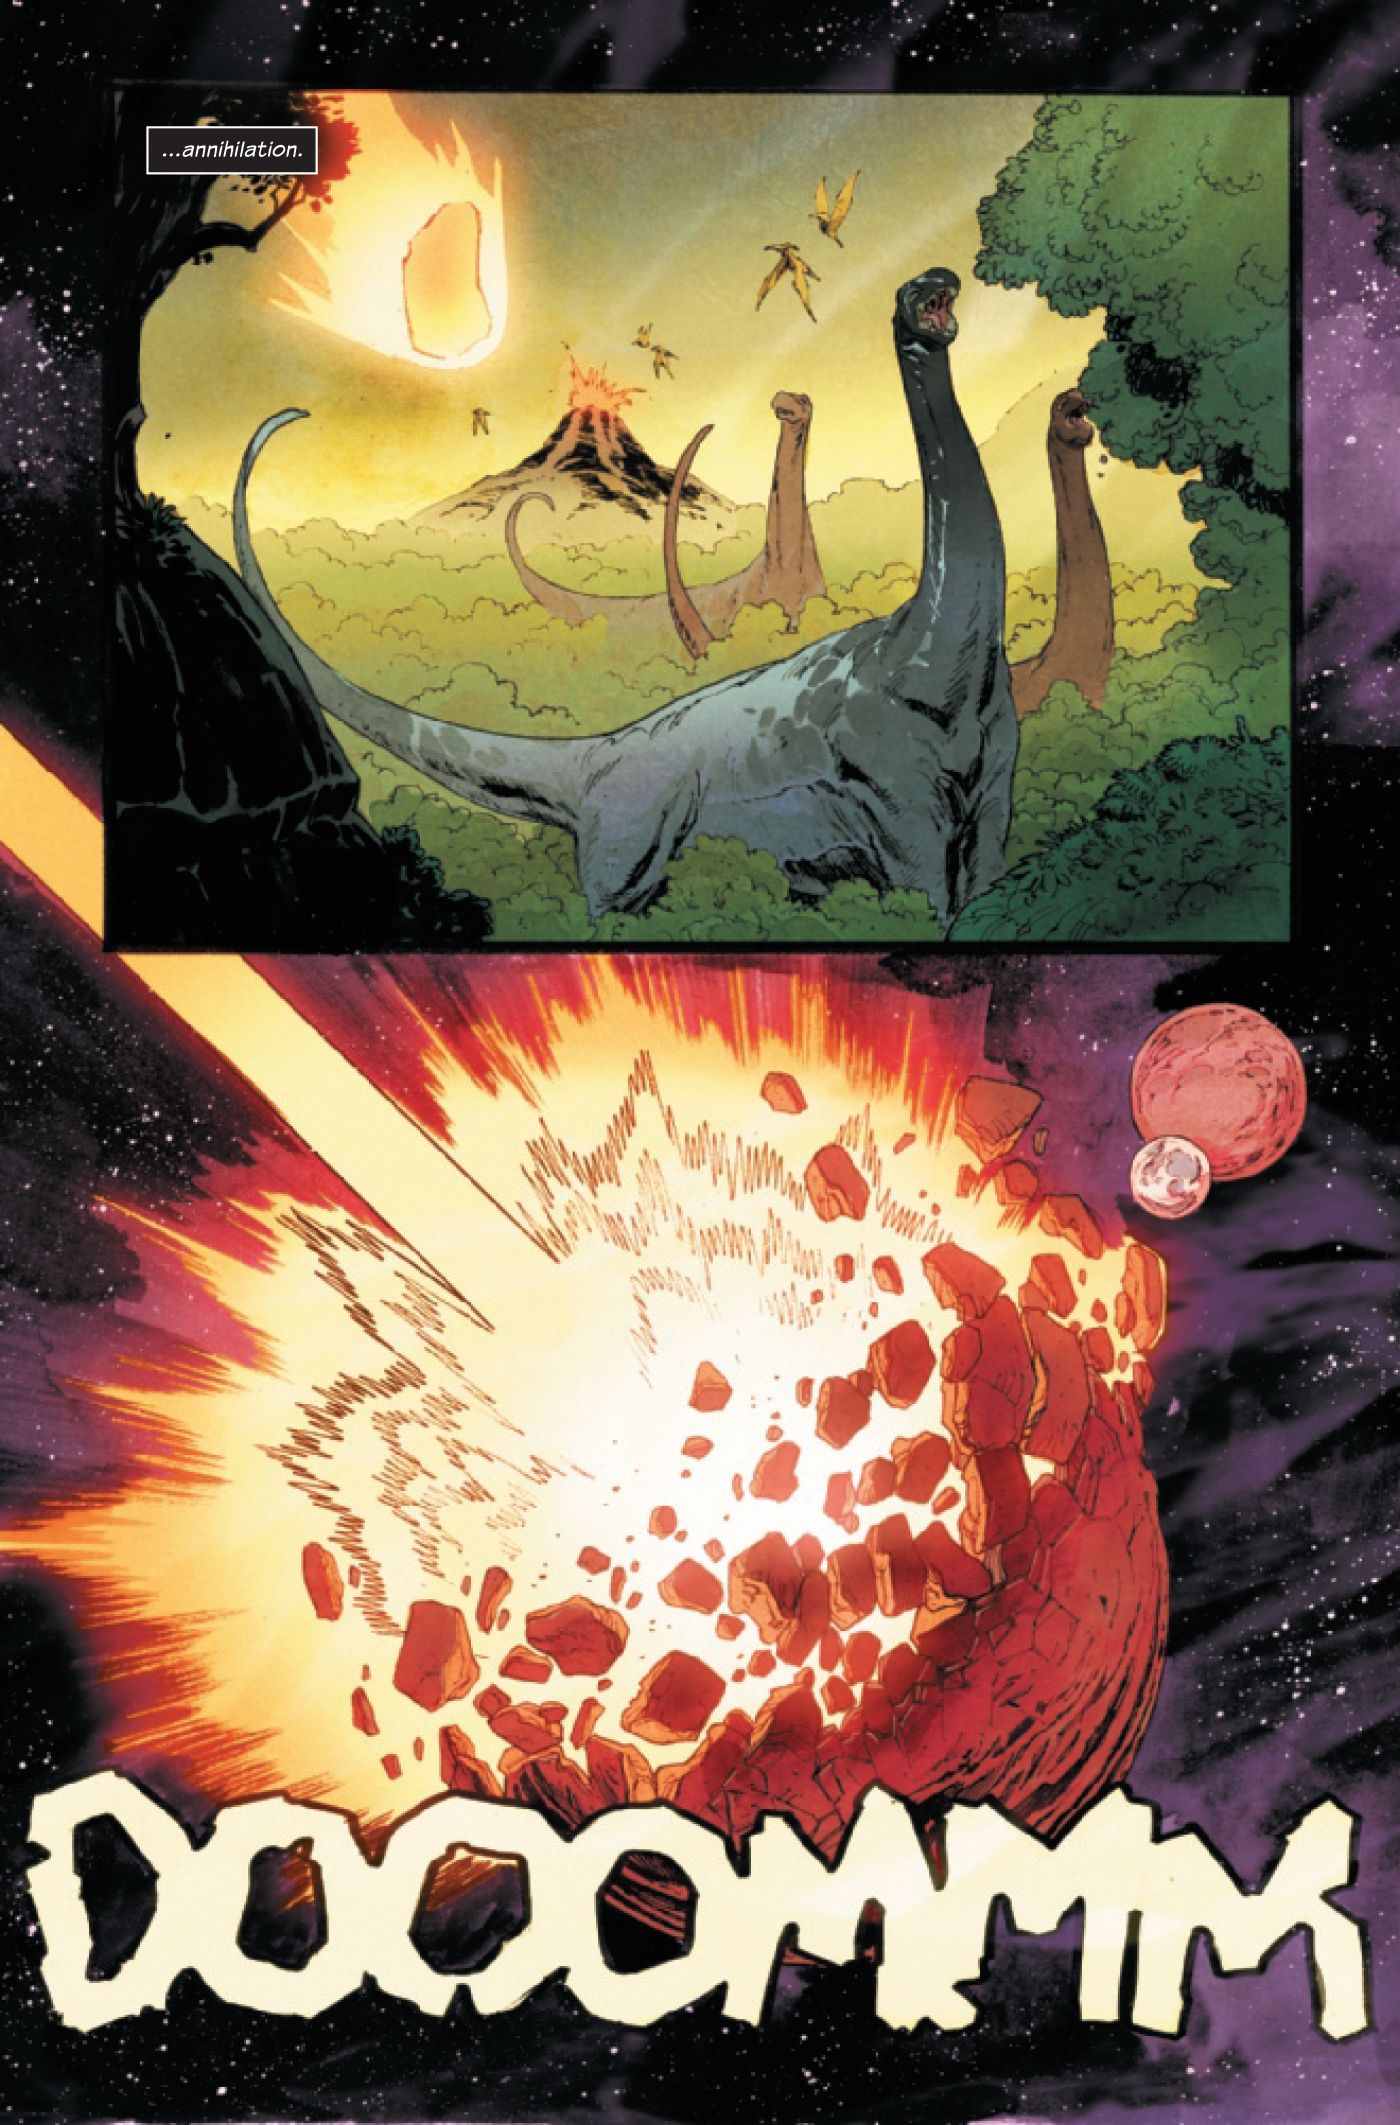 The meteor that killed the dinosaurs is shown destroying a planet.